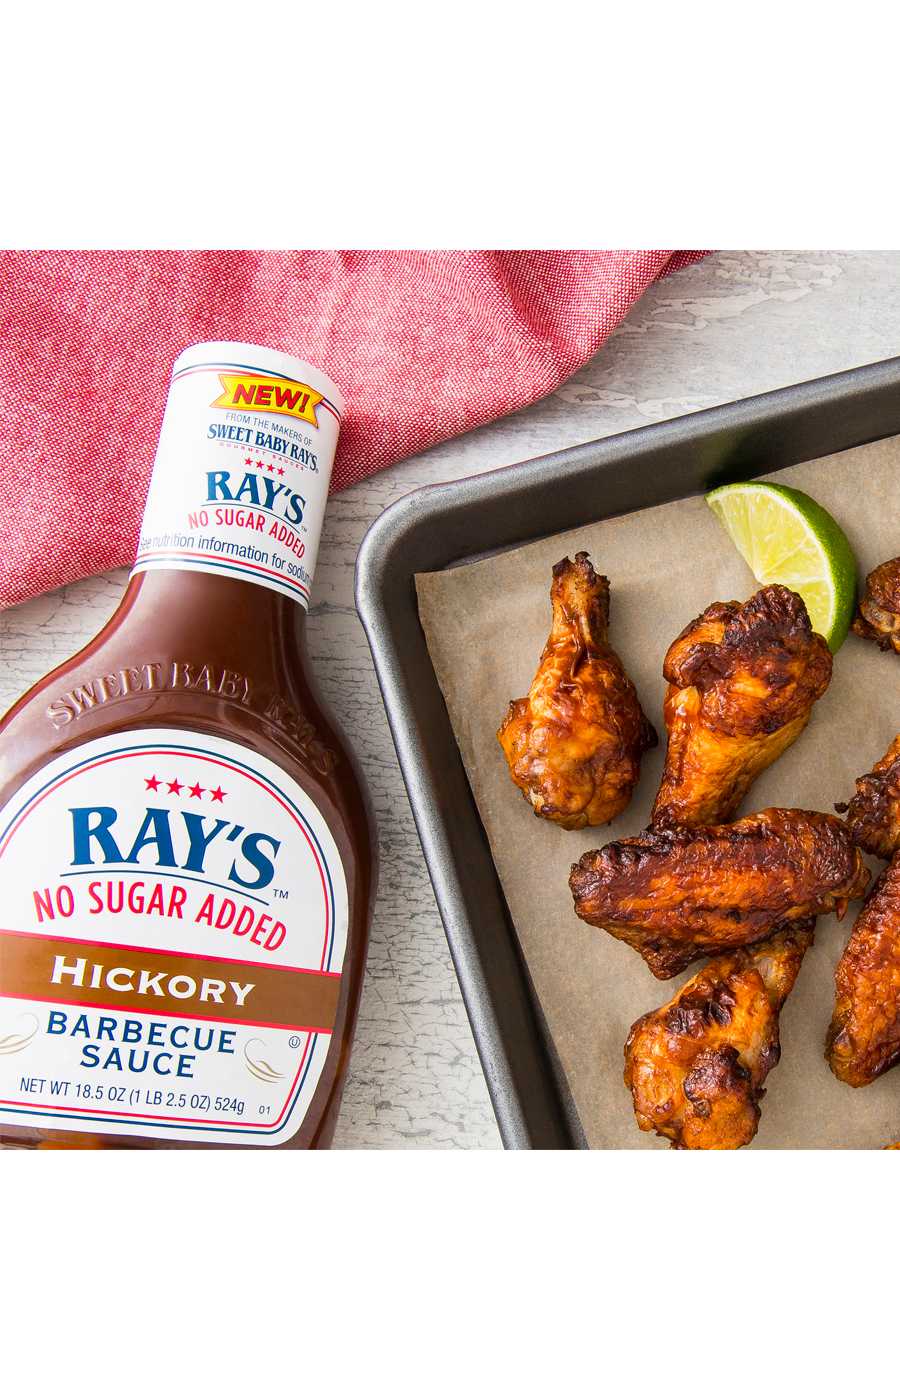 Sweet Baby Ray's No Sugar Added Hickory Barbecue Sauce; image 2 of 4